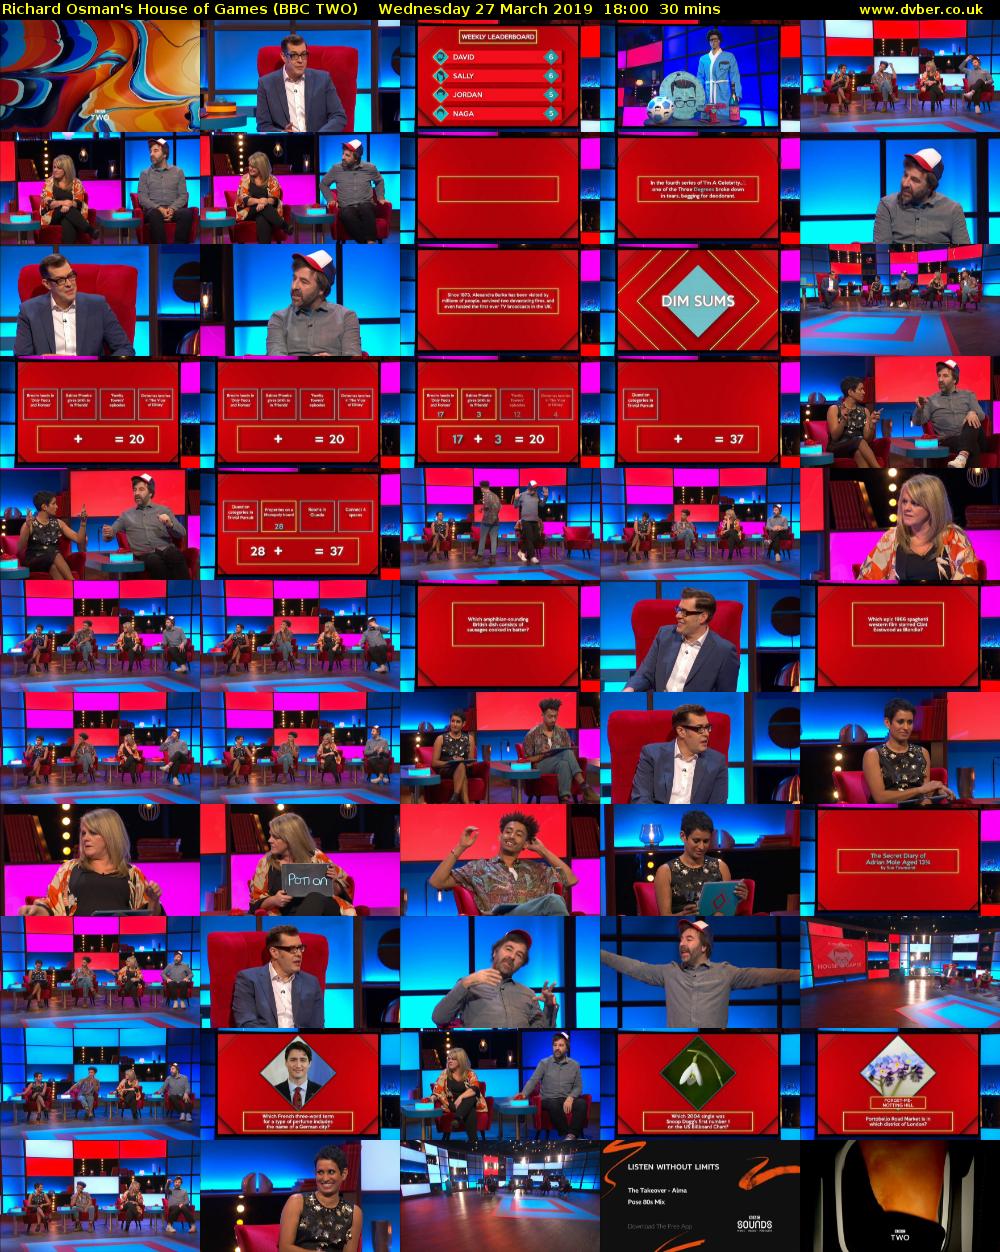 Richard Osman's House of Games (BBC TWO) Wednesday 27 March 2019 18:00 - 18:30